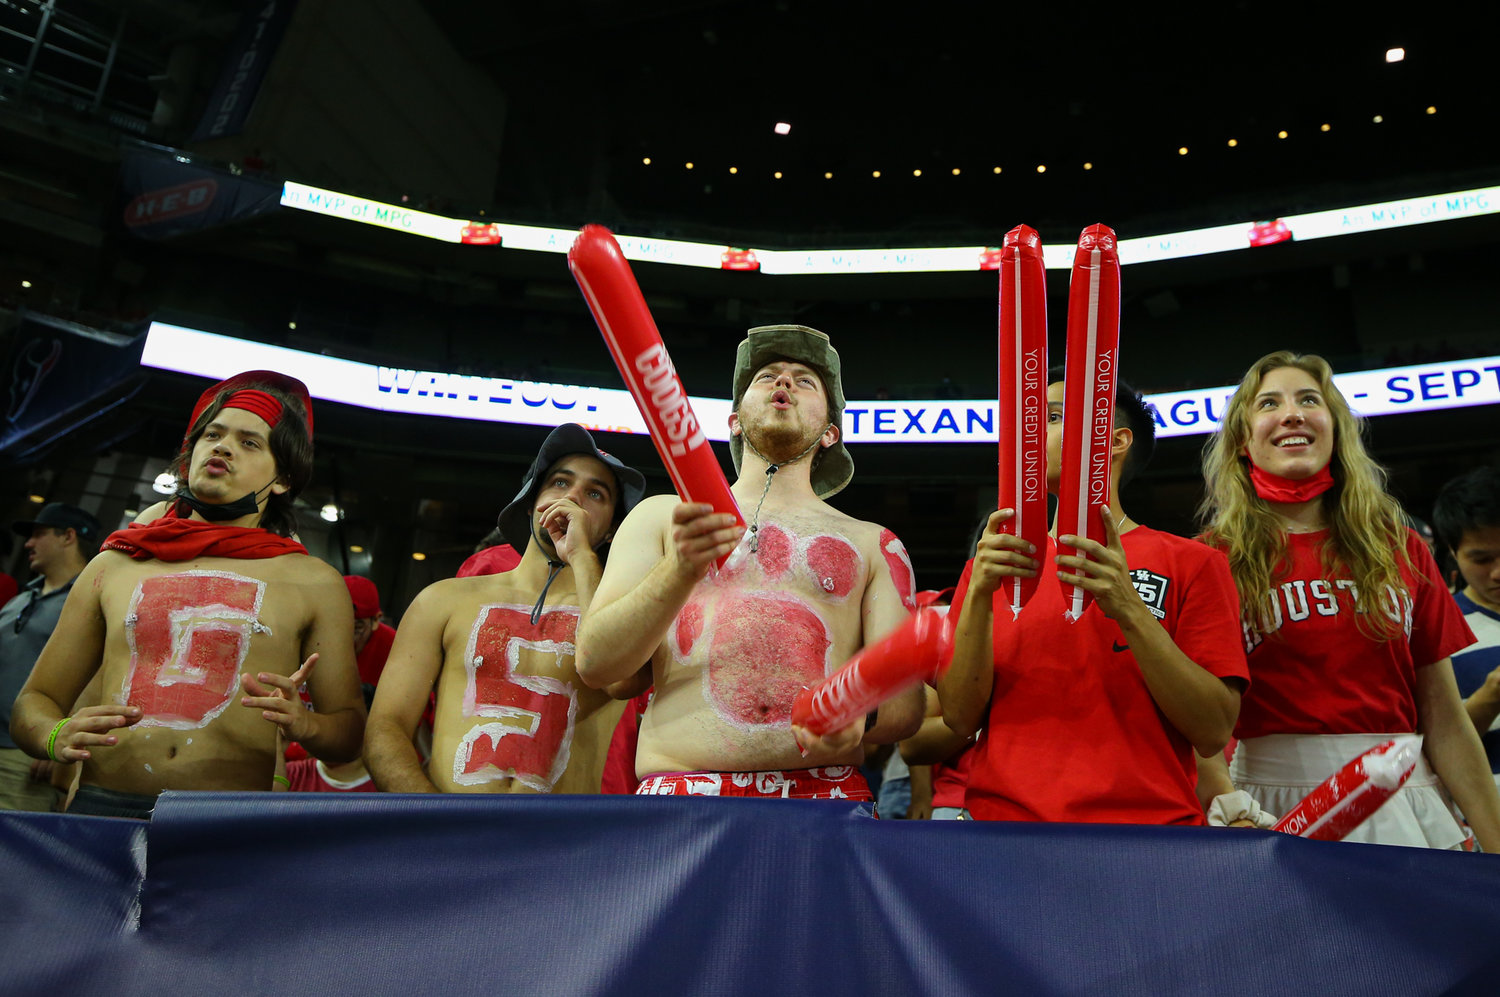 The Houston Cougars student section during an NCAA football game between Houston and Texas Tech on September 4, 2021 in Houston, Texas.